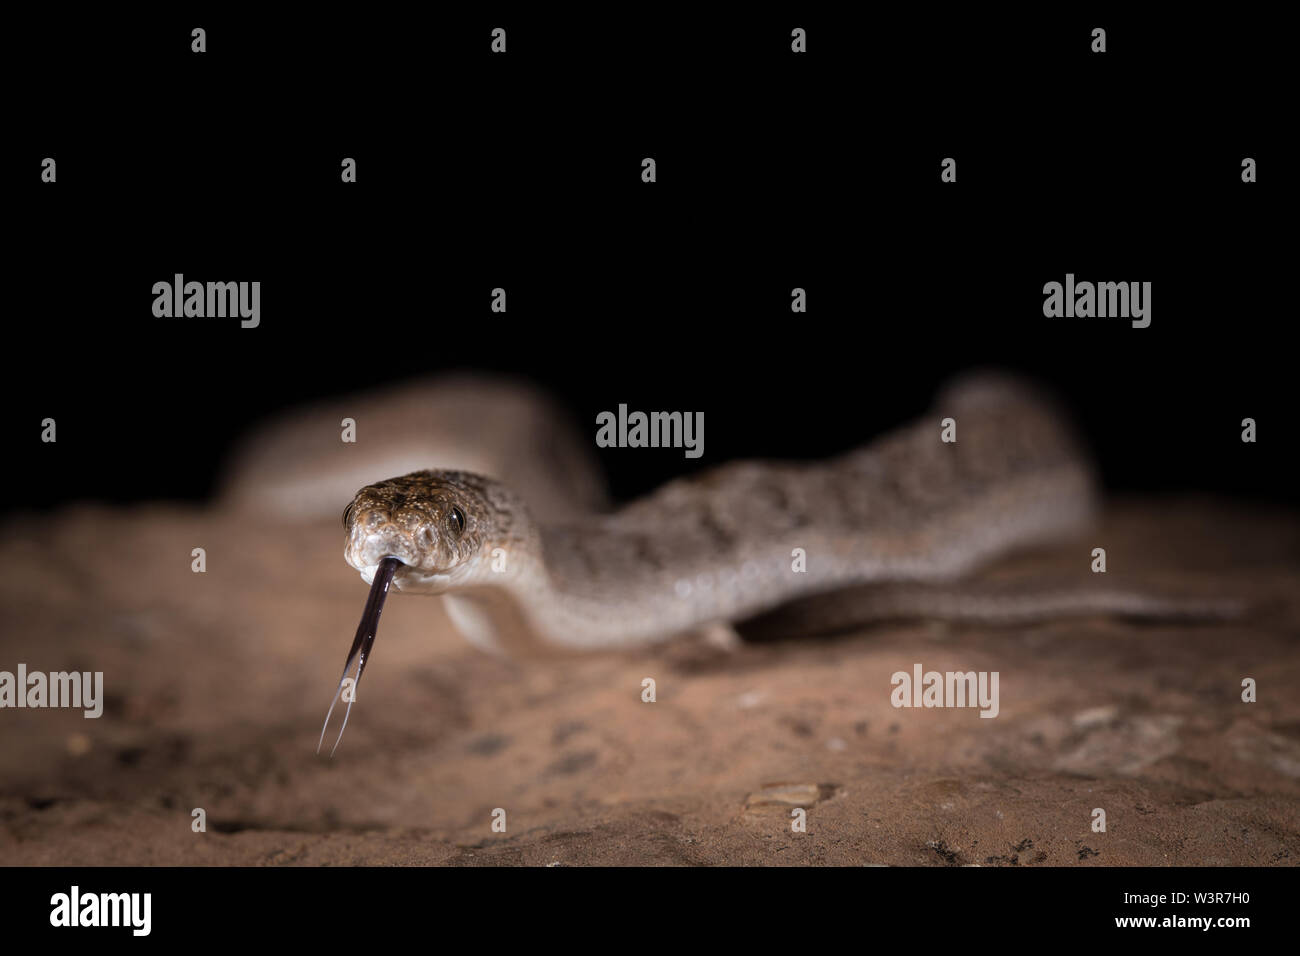 Common egg-eaters or rhombic egg-eaters, Dasypeltis scabra, in Madikwe Game Reserve, North West Province, South Africa are common. Stock Photo